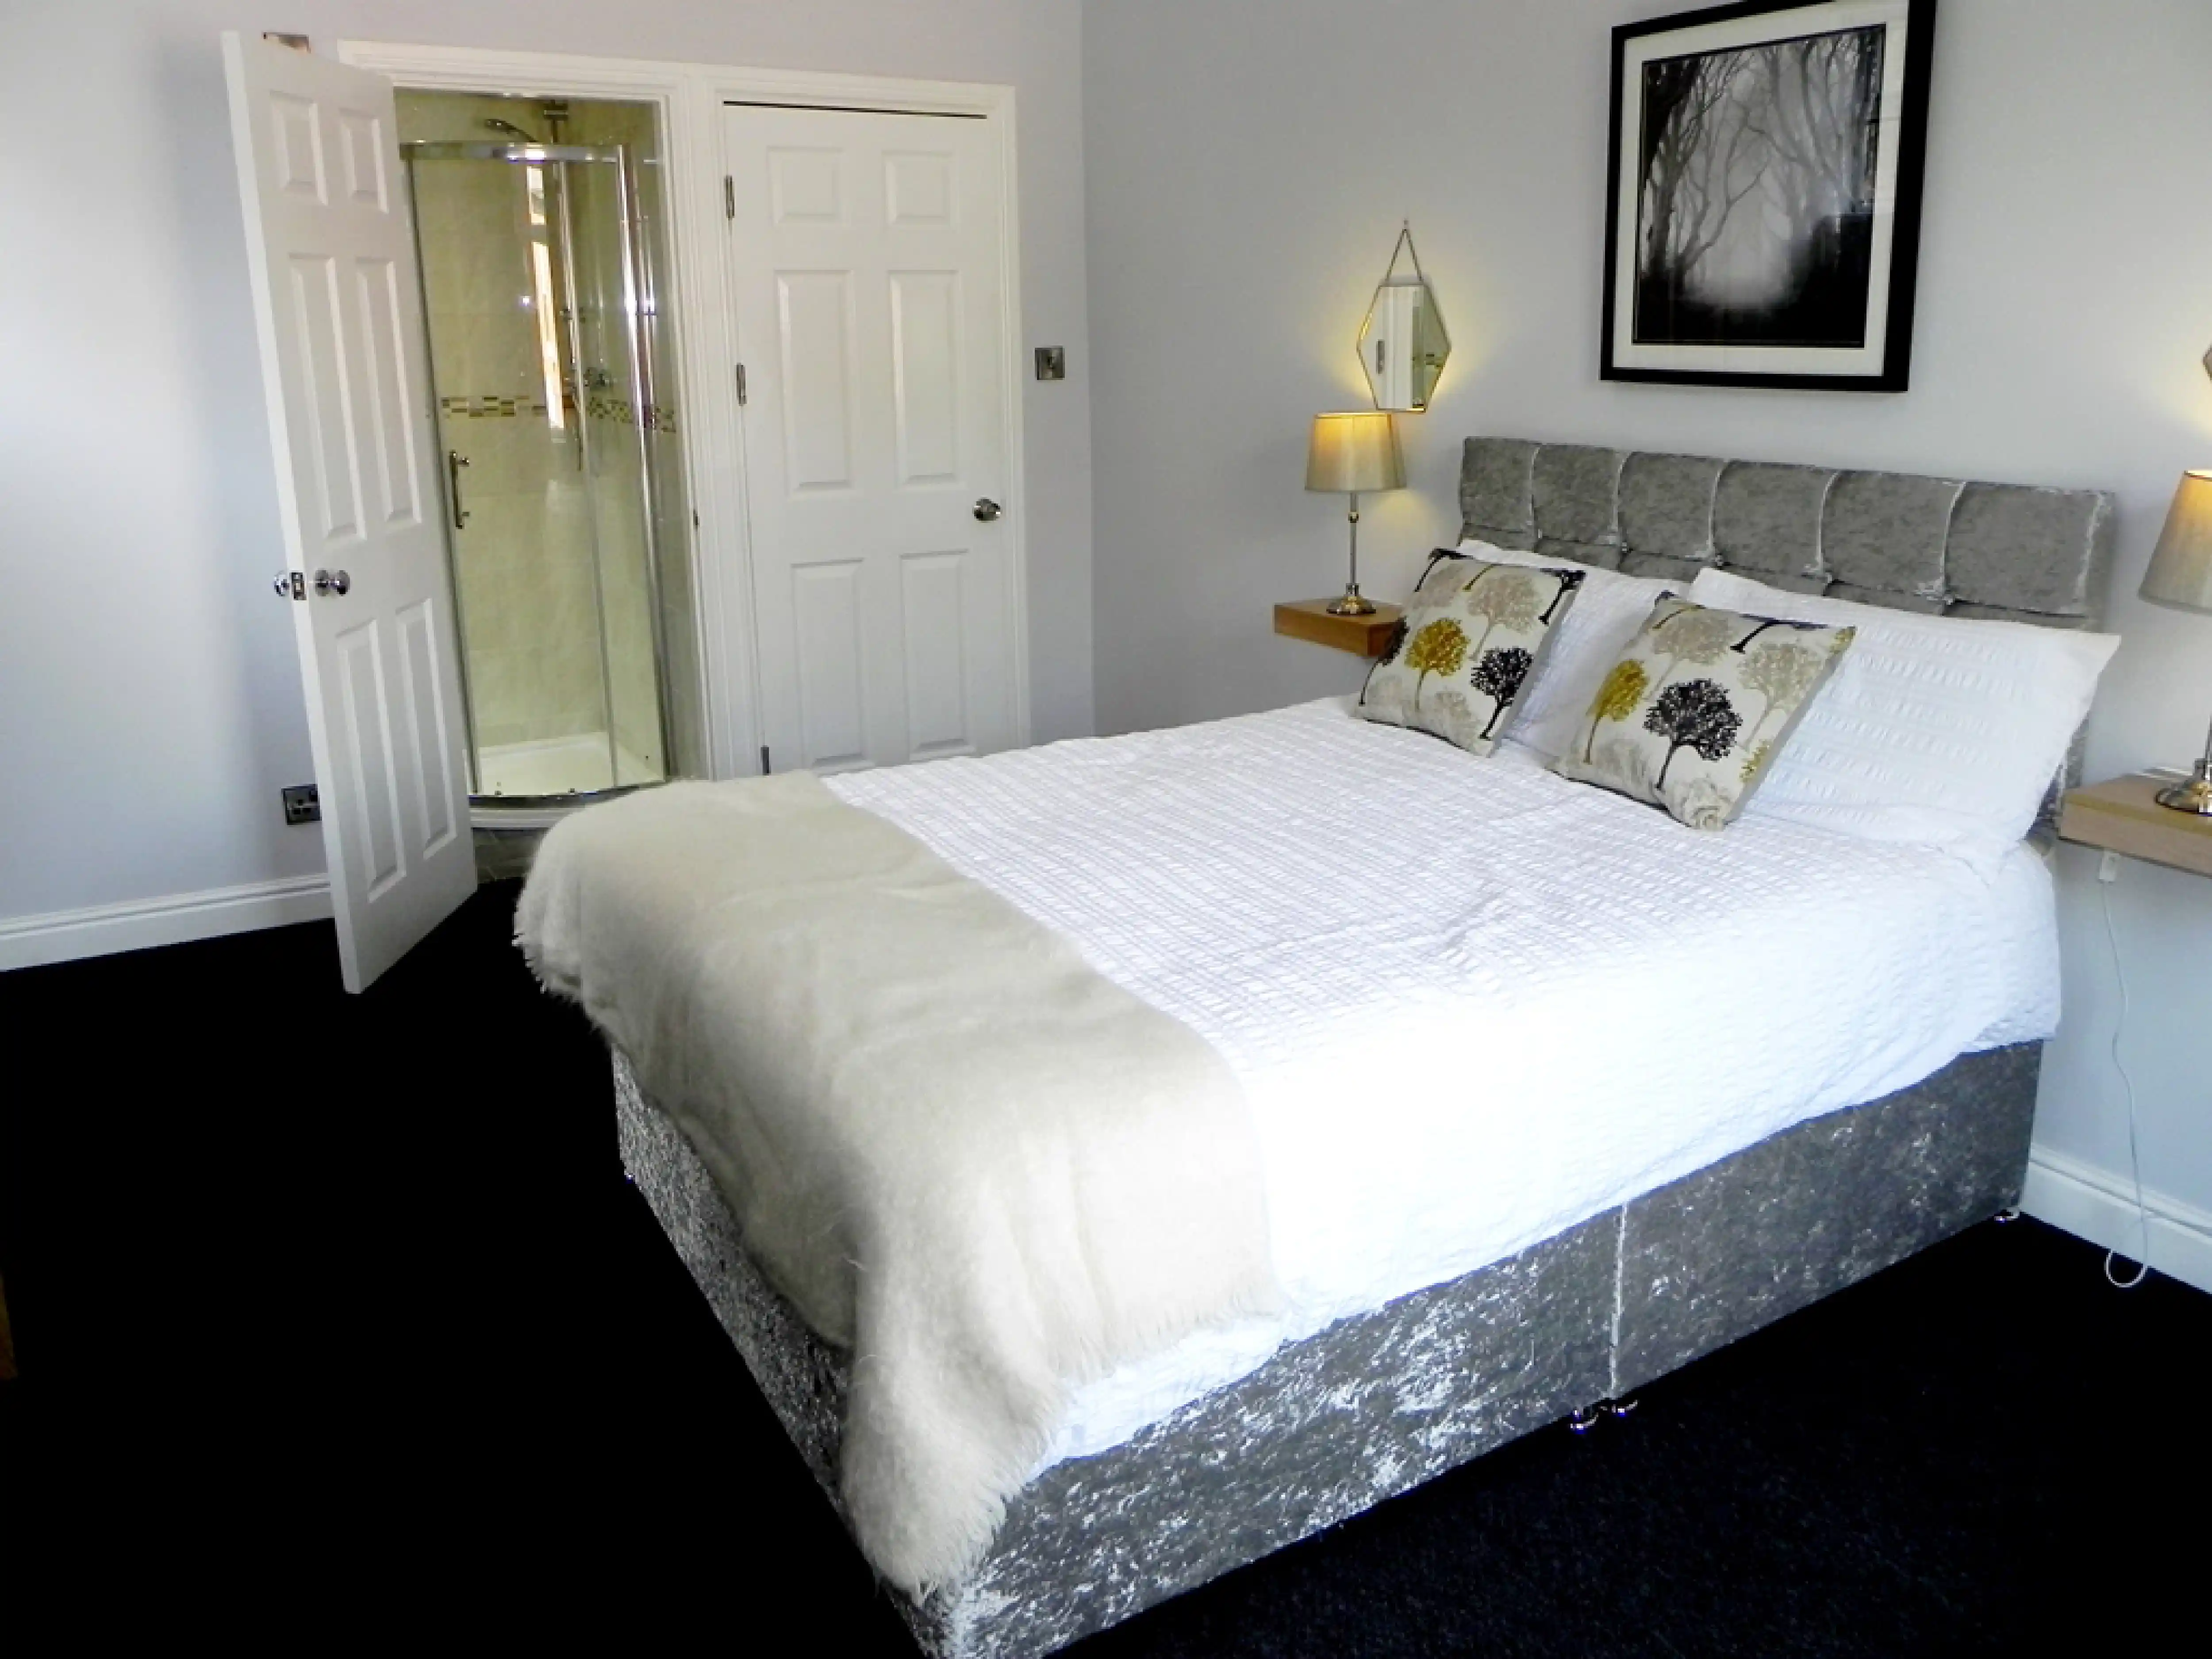 A beautiful bedroom at one of our refurbished property rentals